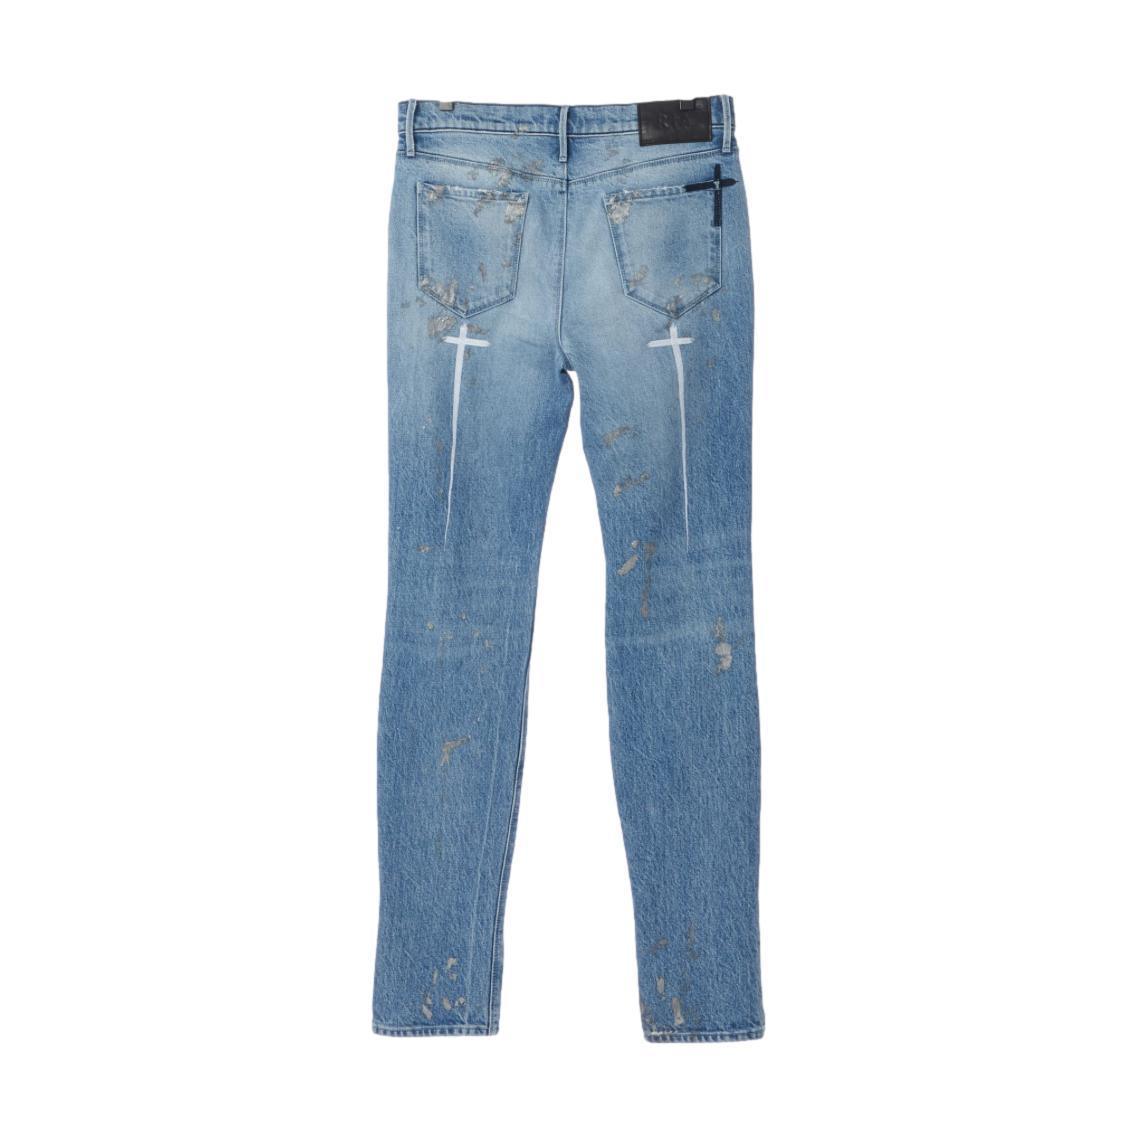 RTA BRYANT MID BLUE SILVER PAINT JEANS - Gravity NYC